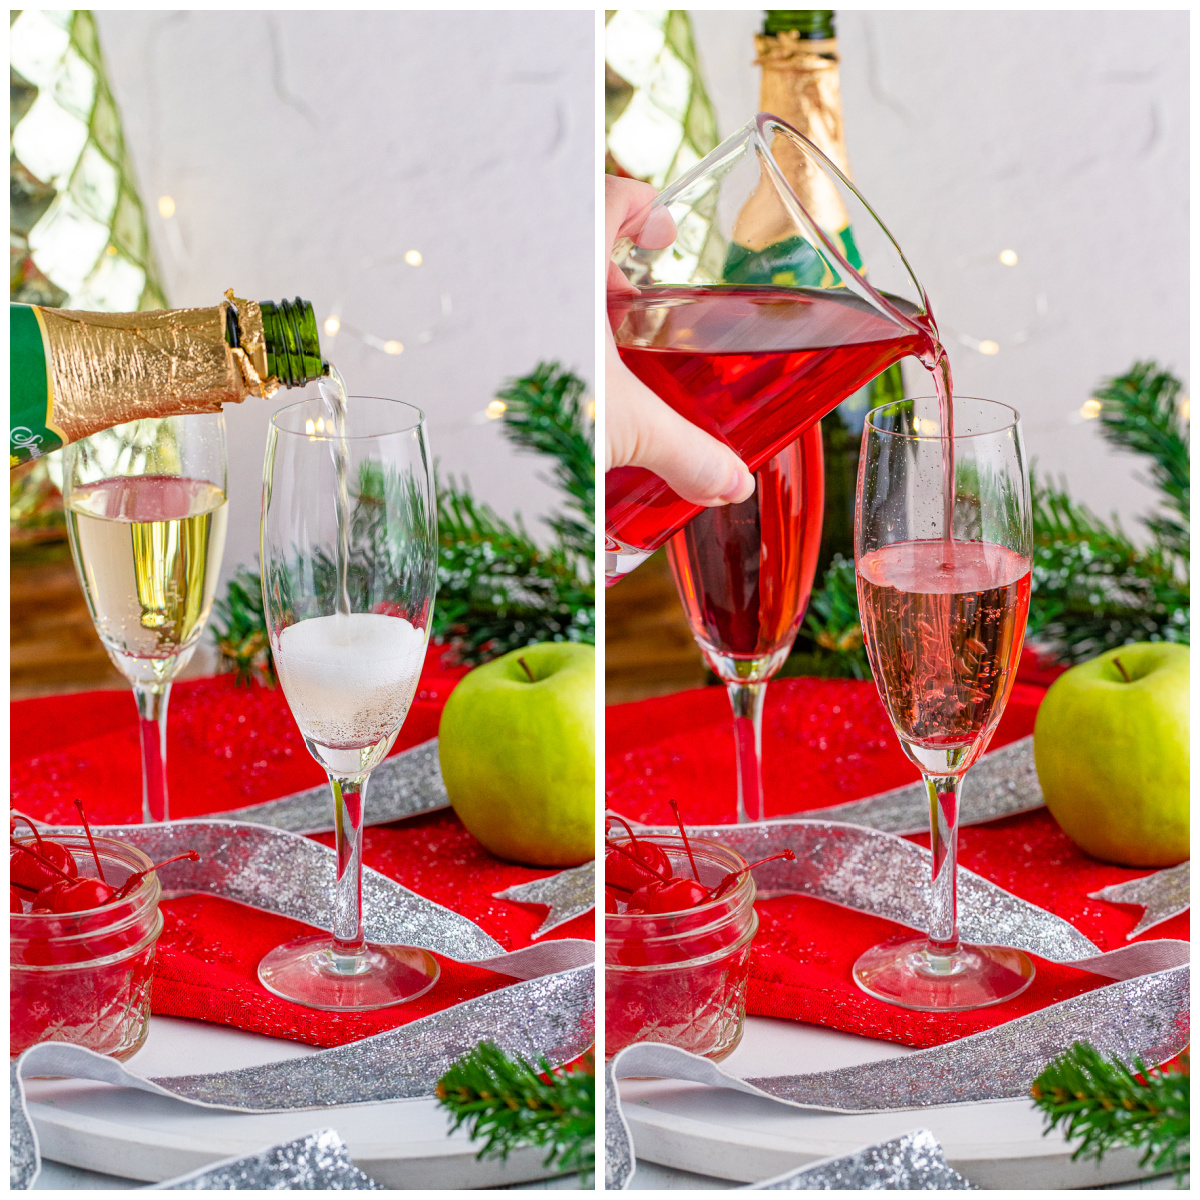 Step by step photos on how to make Christmas Mimosa Mocktails.